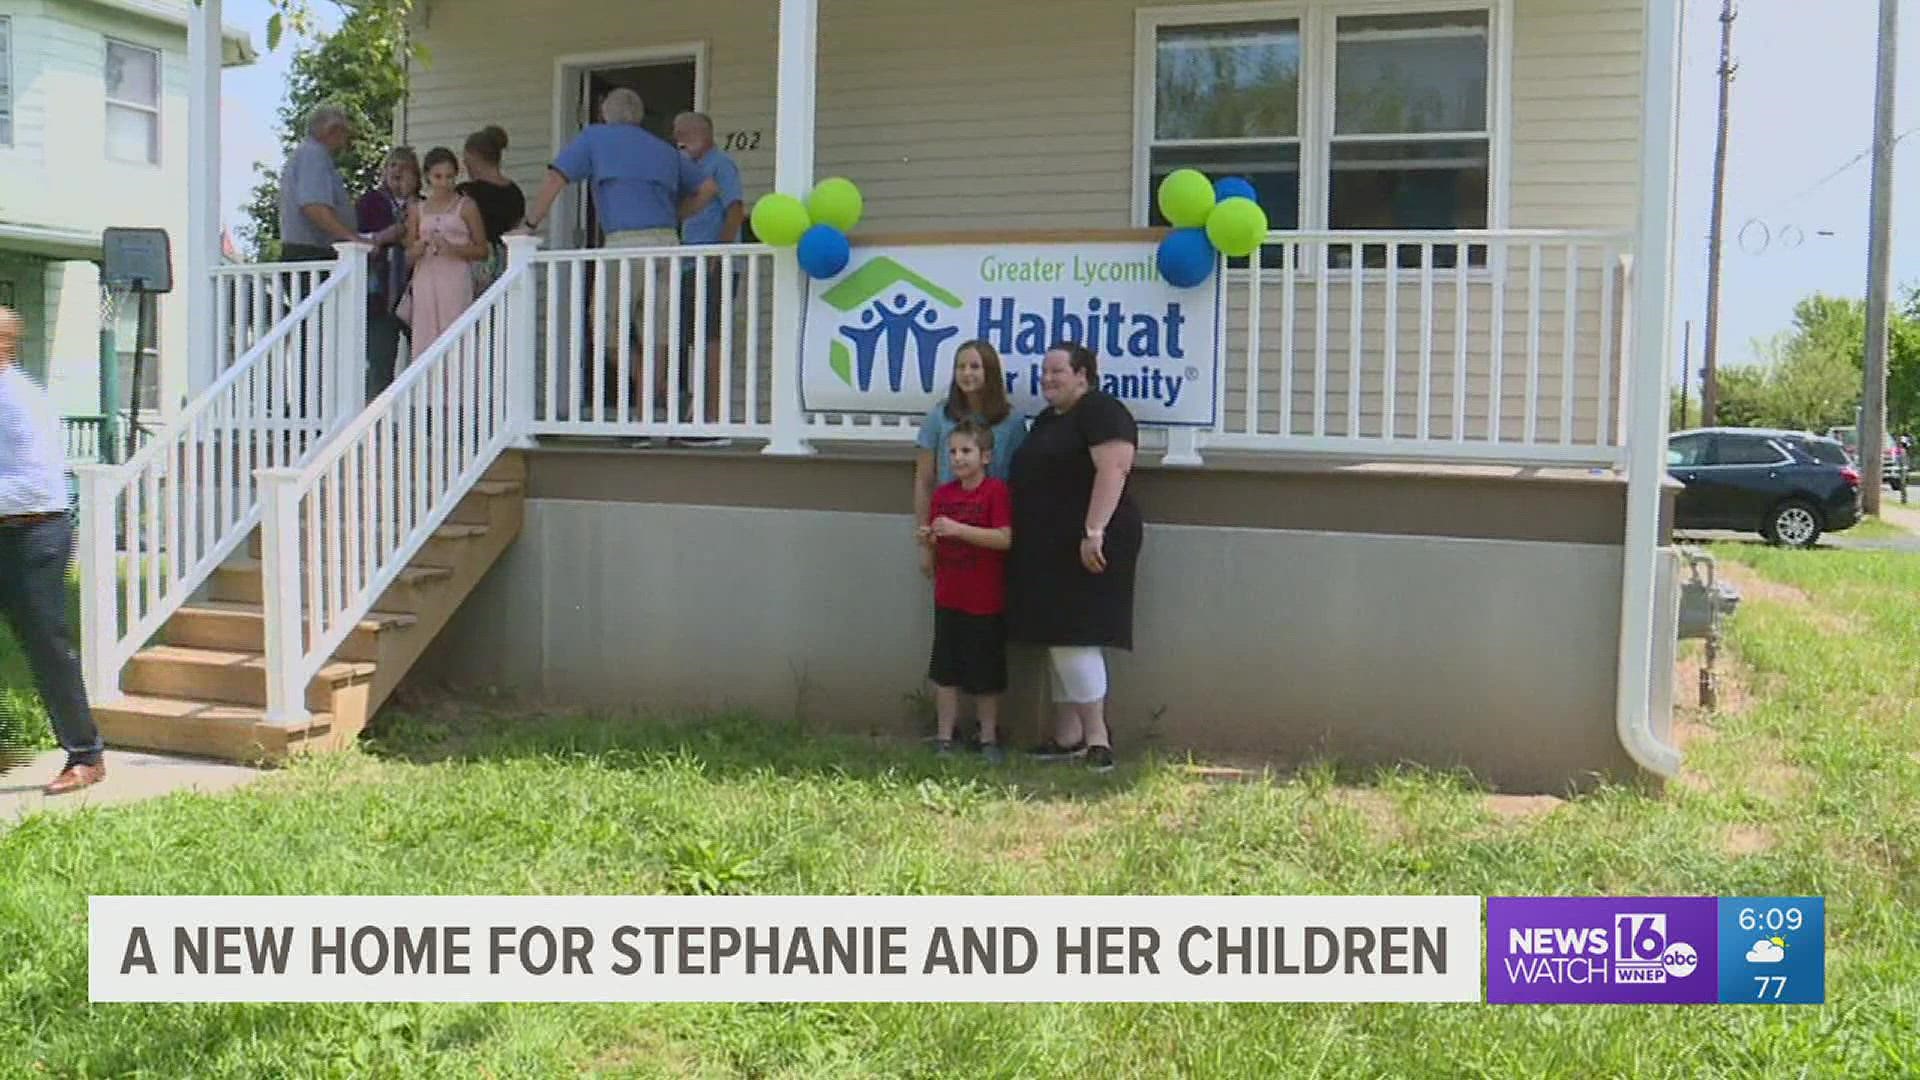 The Matthews family will move into their new home in Williamsport this week.